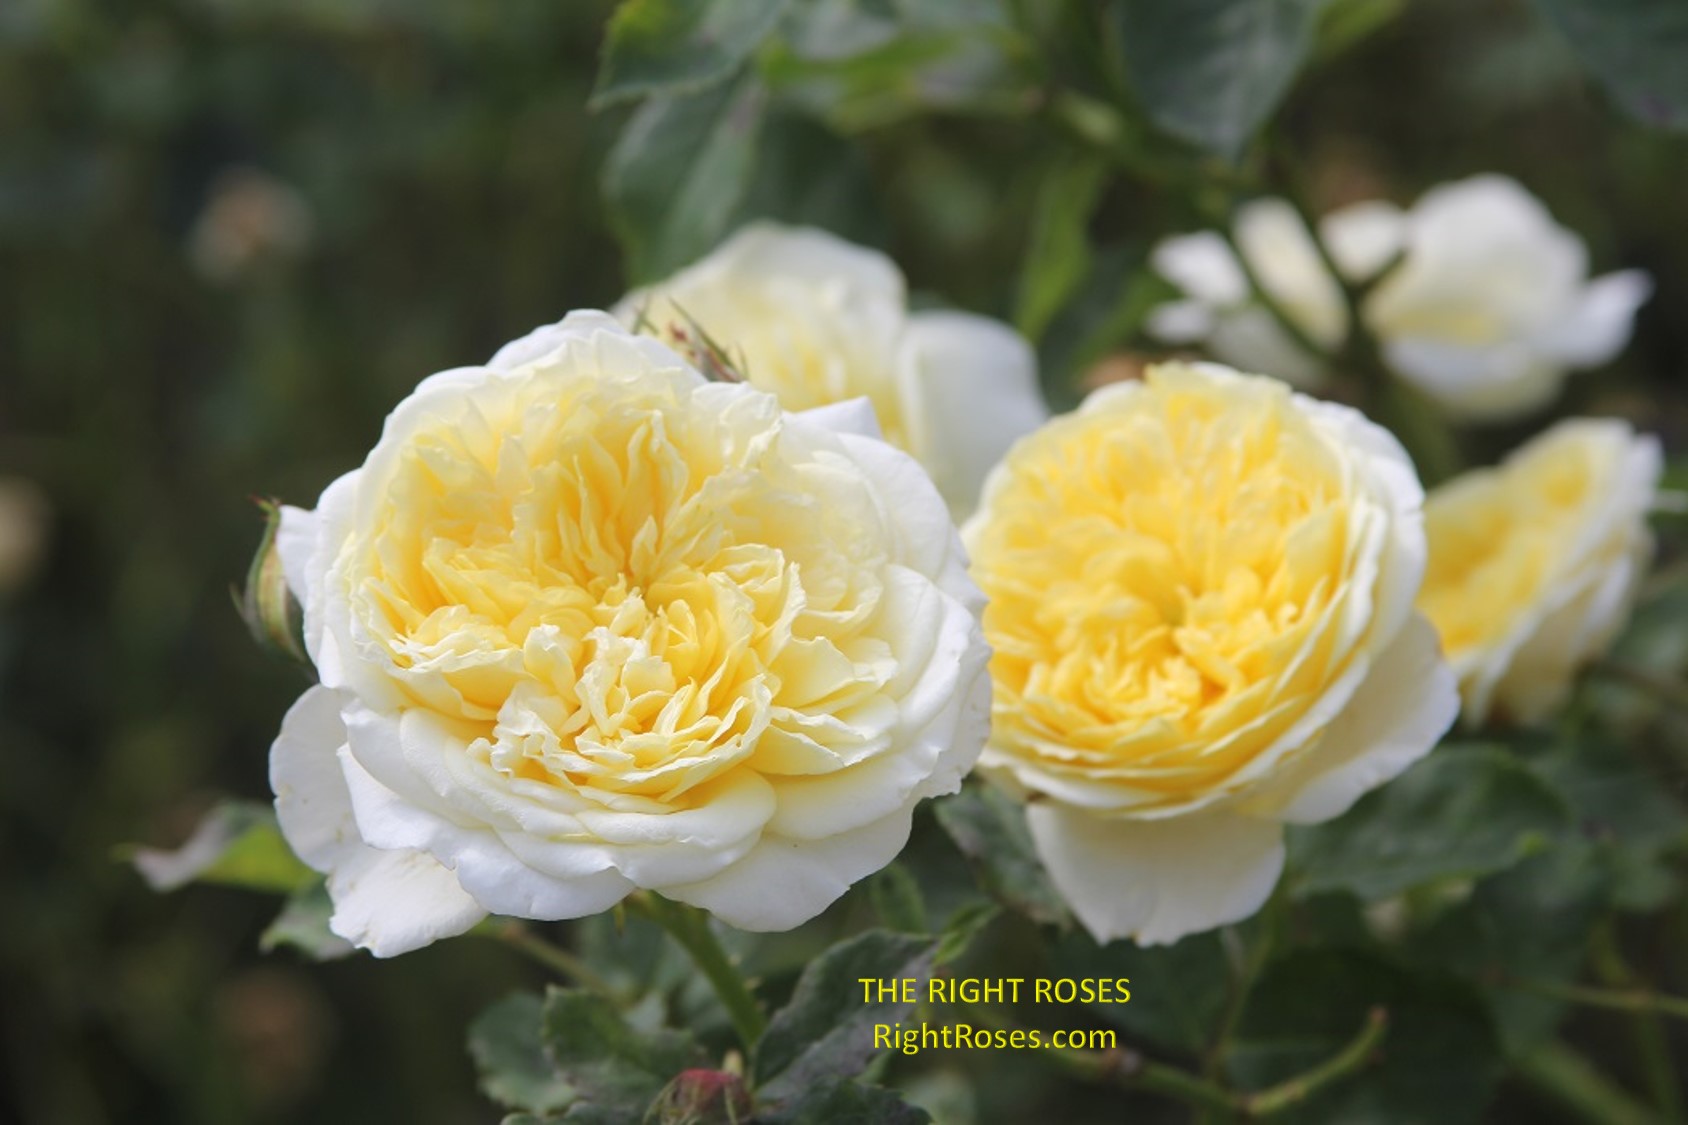 The Pilgrim rose review the right roses score best top garden store david austin english roses rose products rose rating the right leap rose food fertilizer